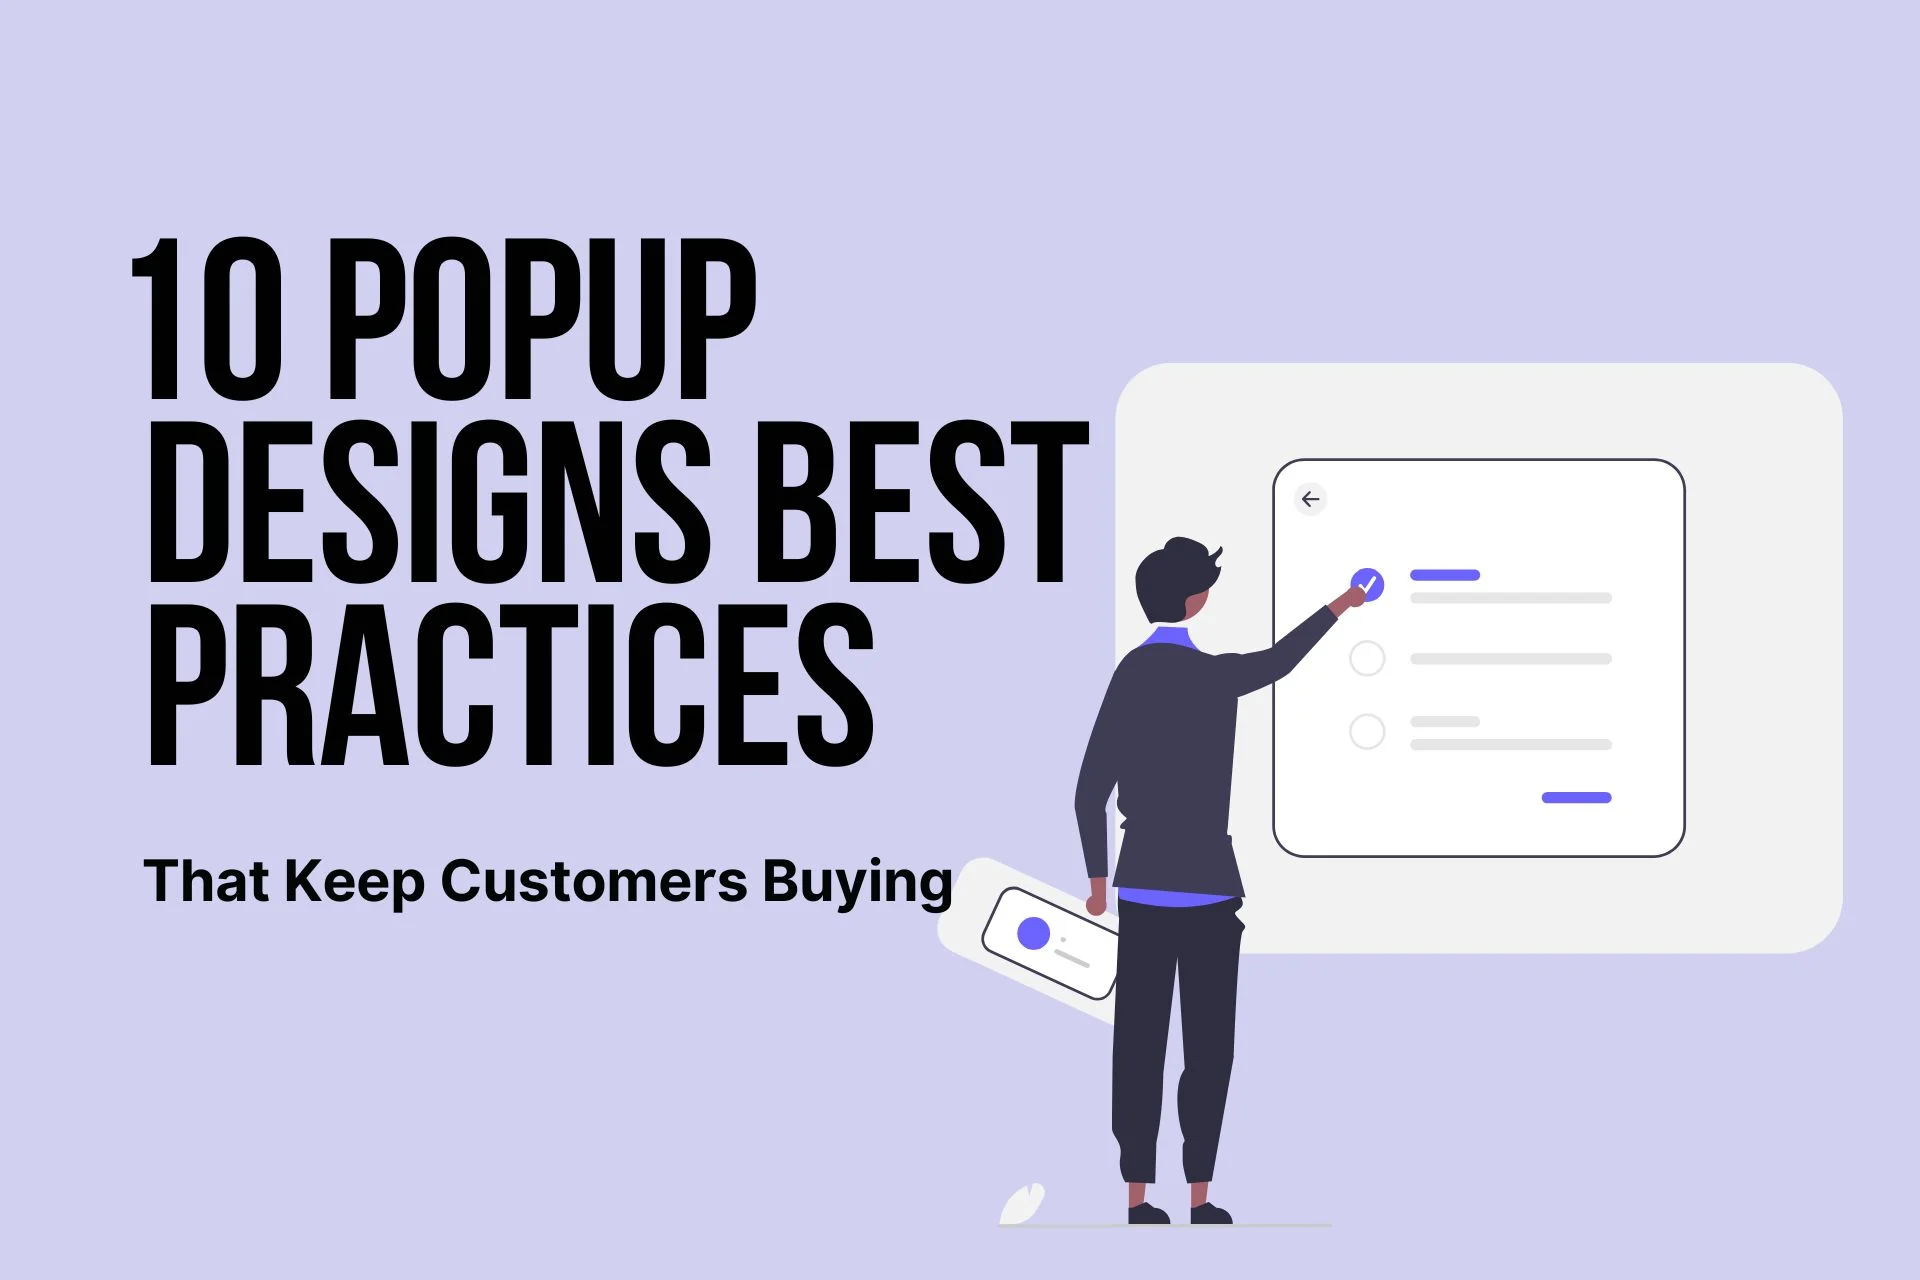 a cover image with the title that says "10 Popup Design Best Practices That Keep Customers Buying" and an illustration of a boy working with a digital board and closing a popup